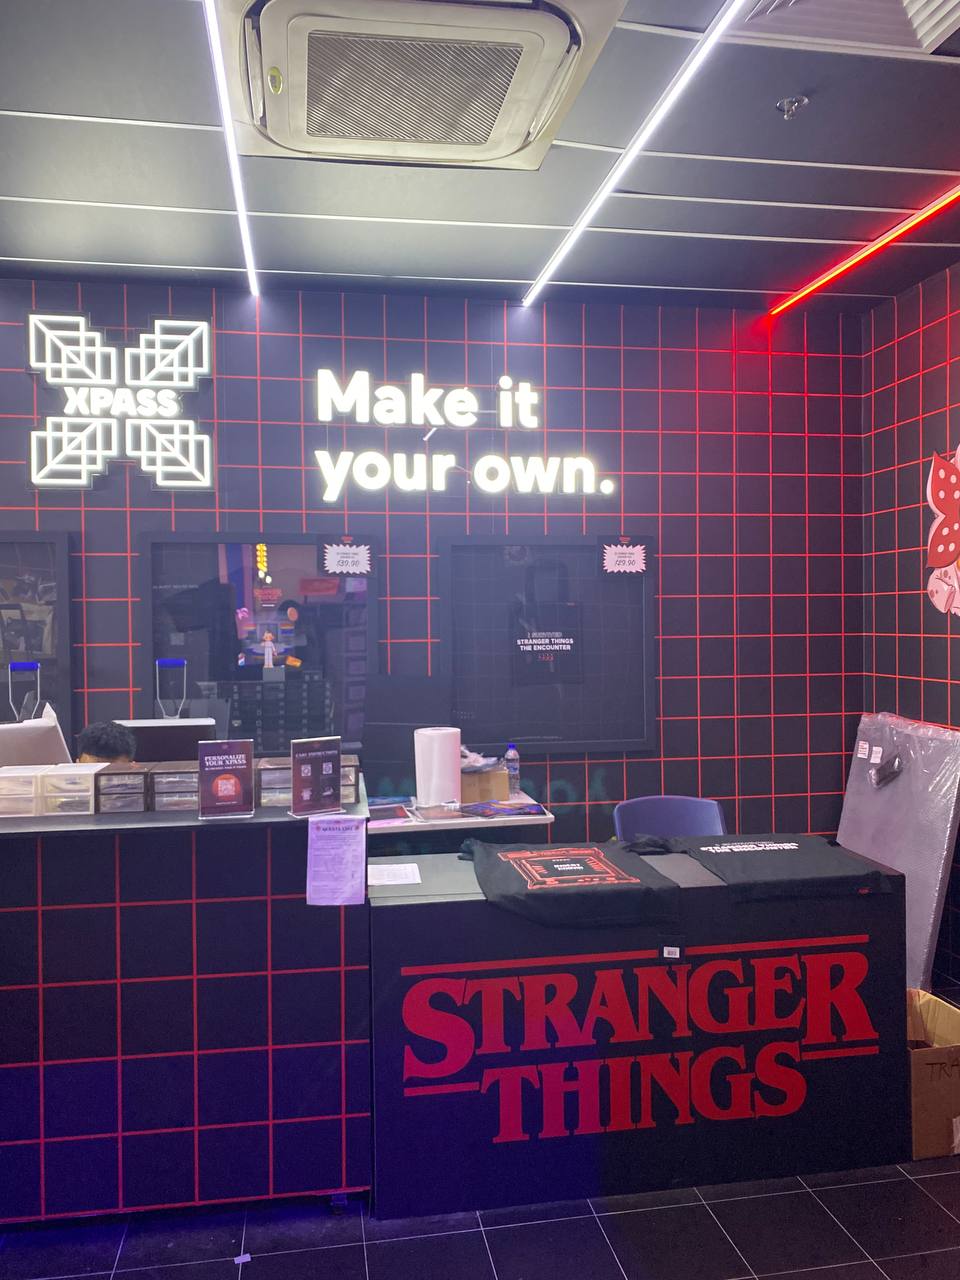 Collect FRGMNTS throughout your journey to unlock iconic Stranger Things elements in your XPass, culminating in a unique digital collectible so you can personalise your souvenirs.